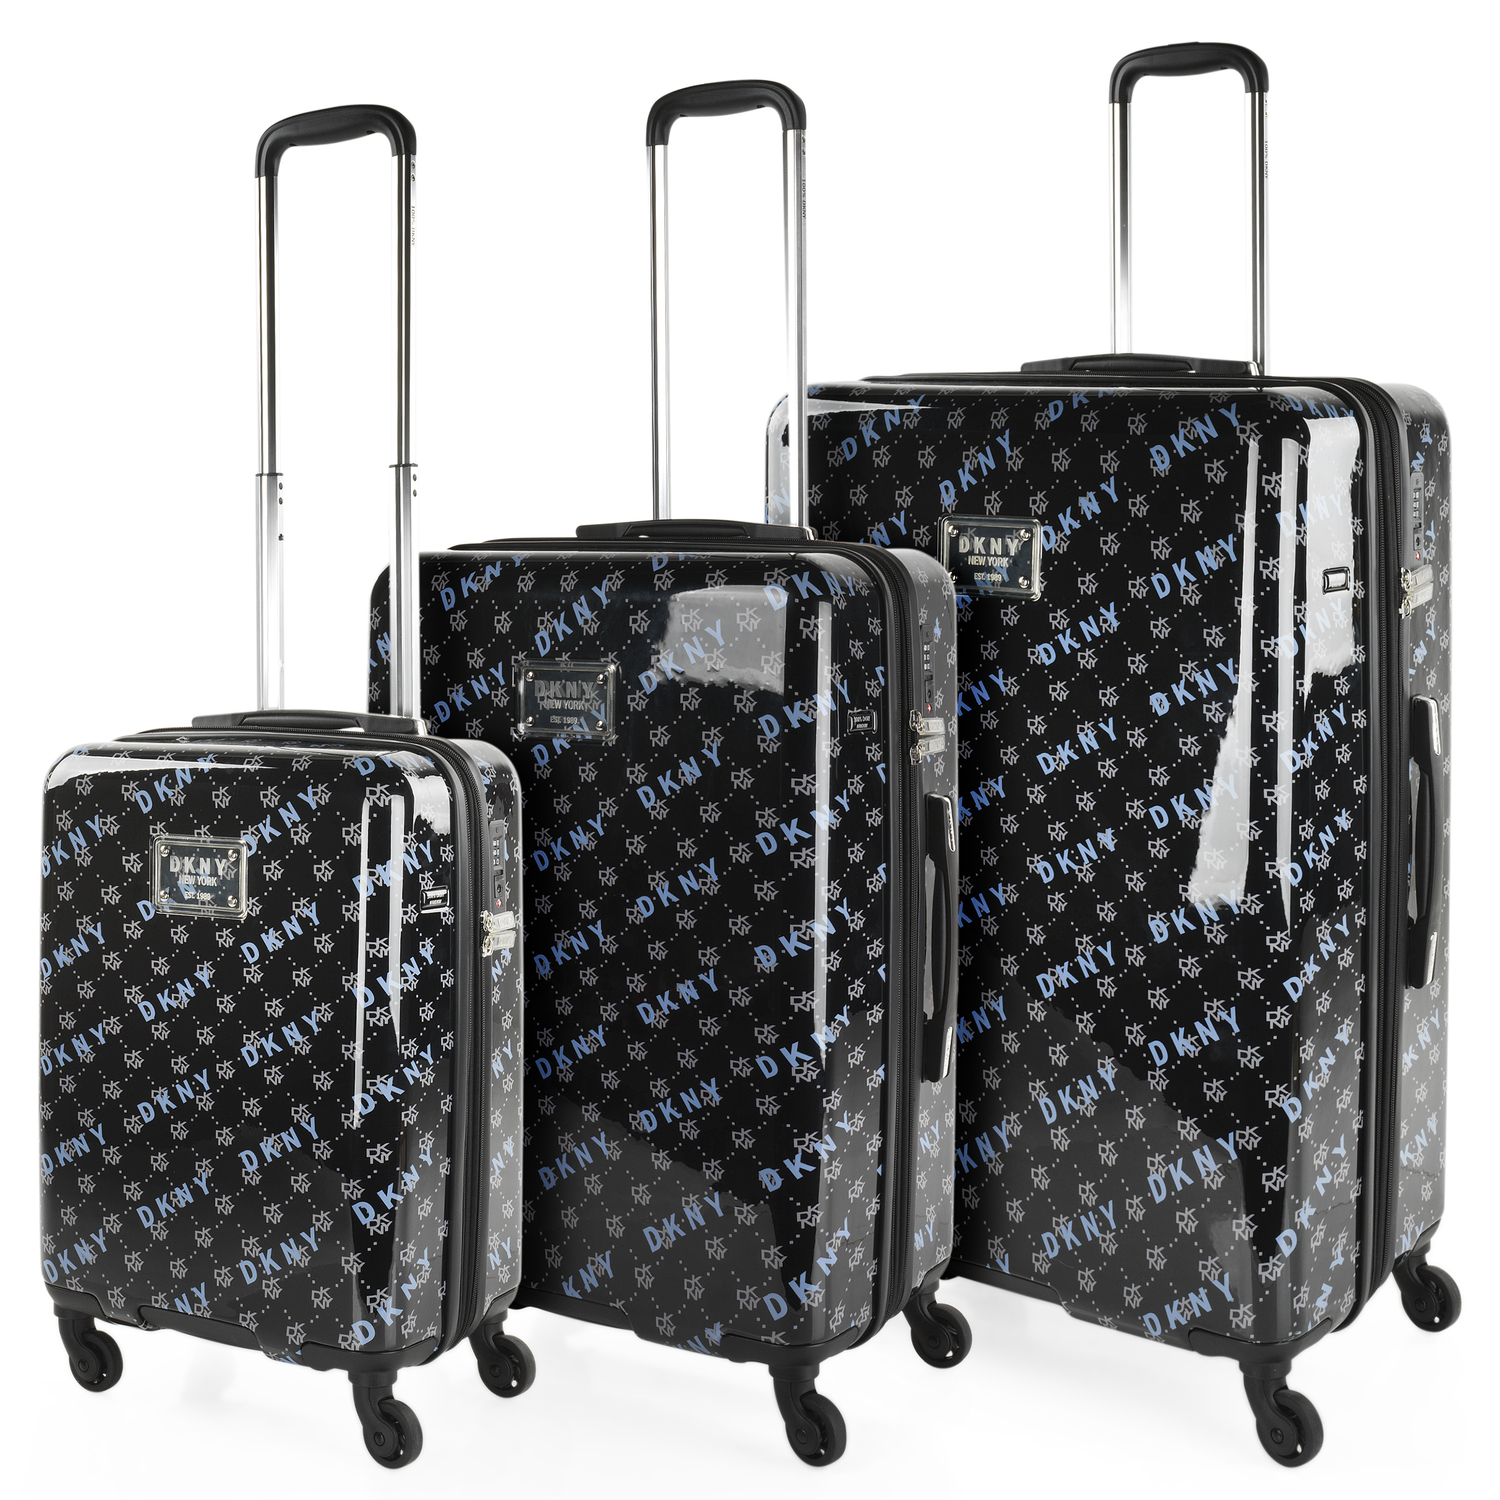 DKNY Allore Hard Cabin Black Luggage Trolley – Beauty Scentiments